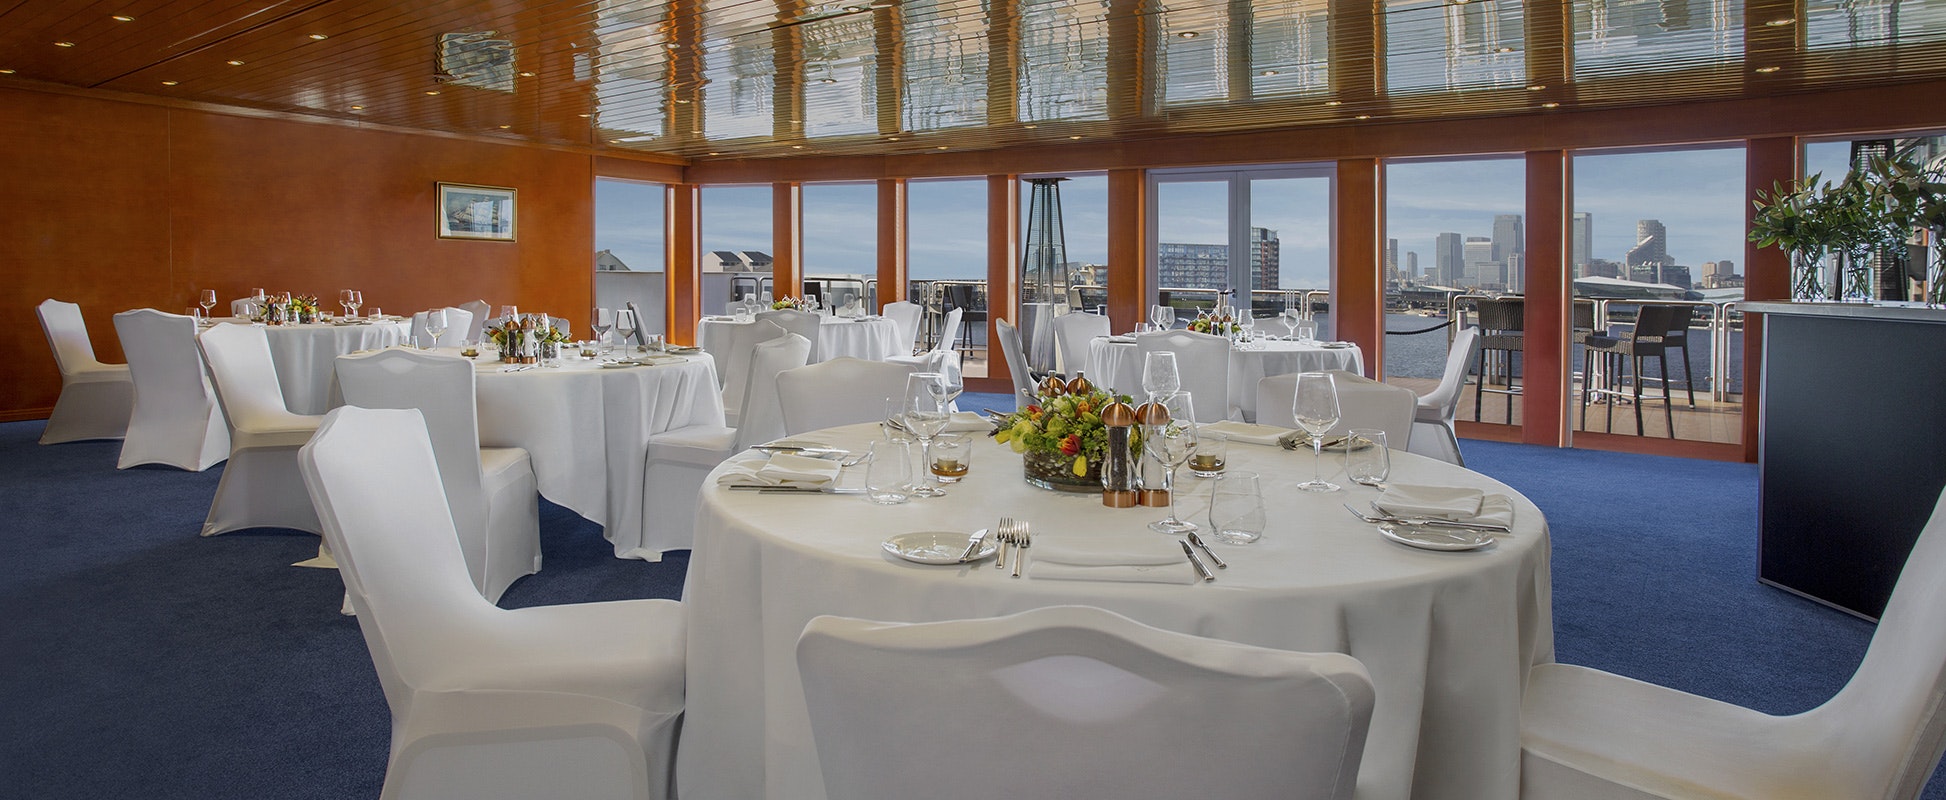 Sunborn London Yacht Hotel - Exclusive Hire image 2